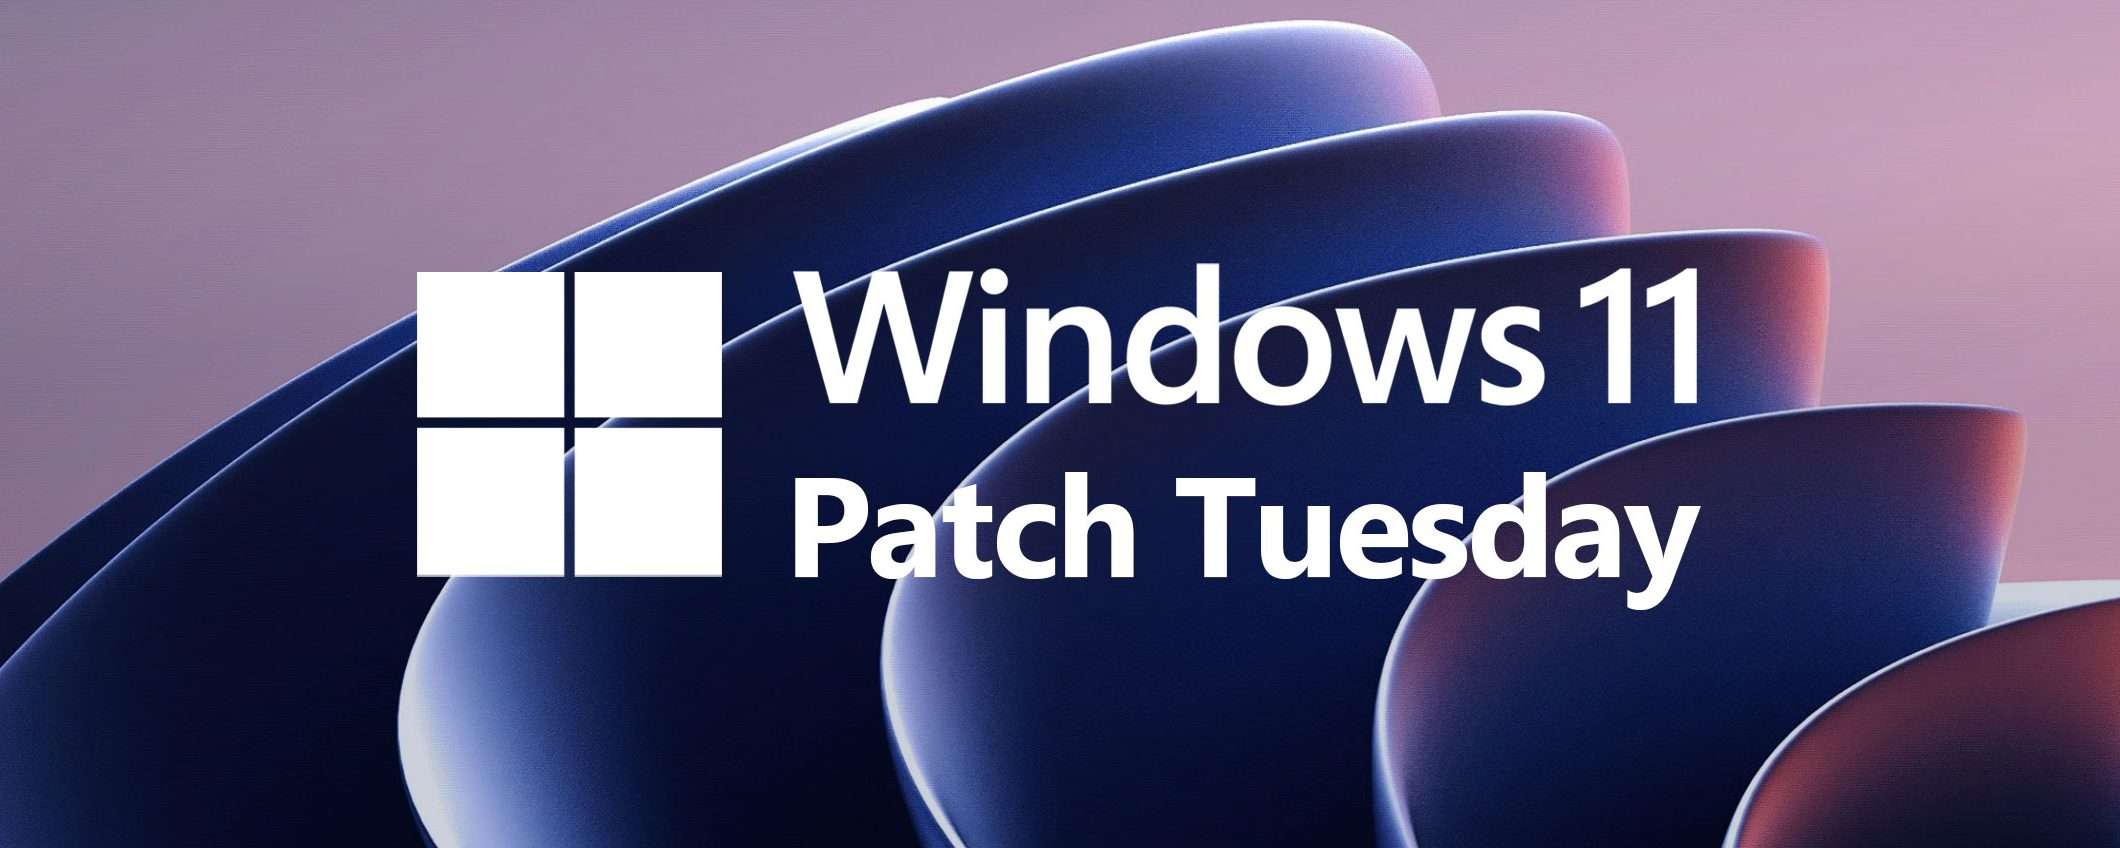 Windows 11: Patch Tuesday gennaio 2023 in download